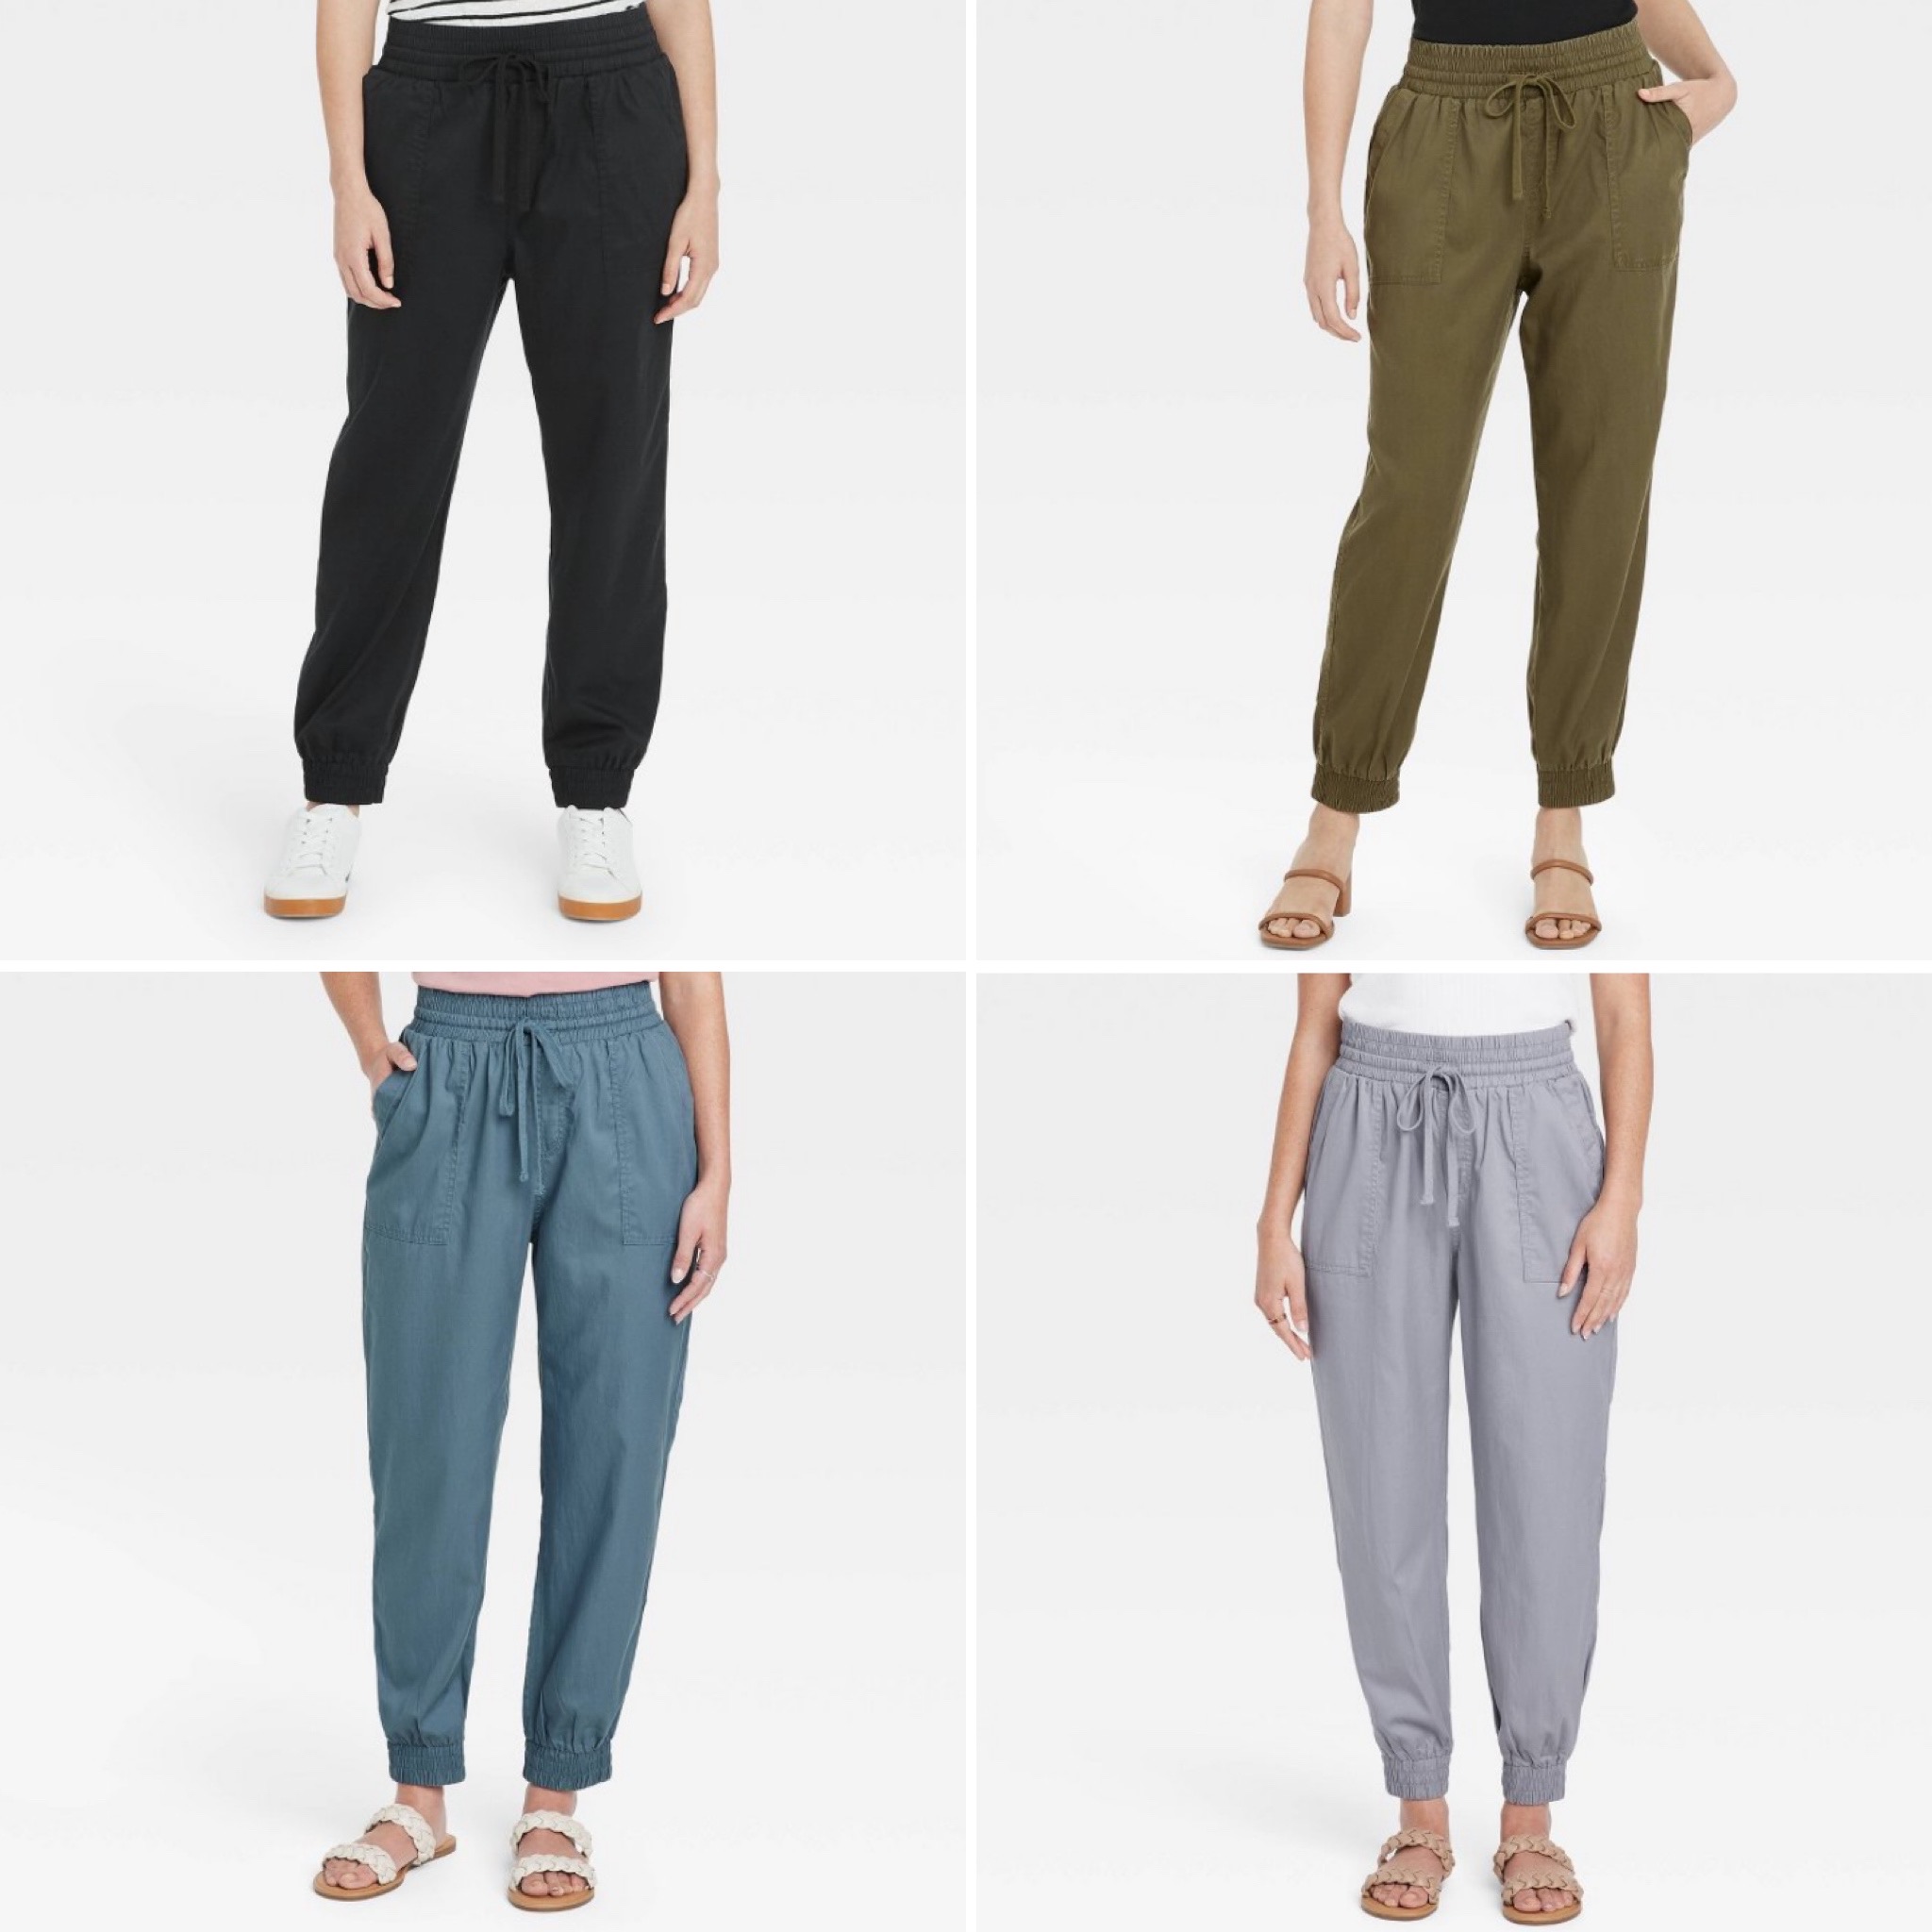 Holiday Gift Style: Jogger Pants for 40% Off in Sizes XS-4X